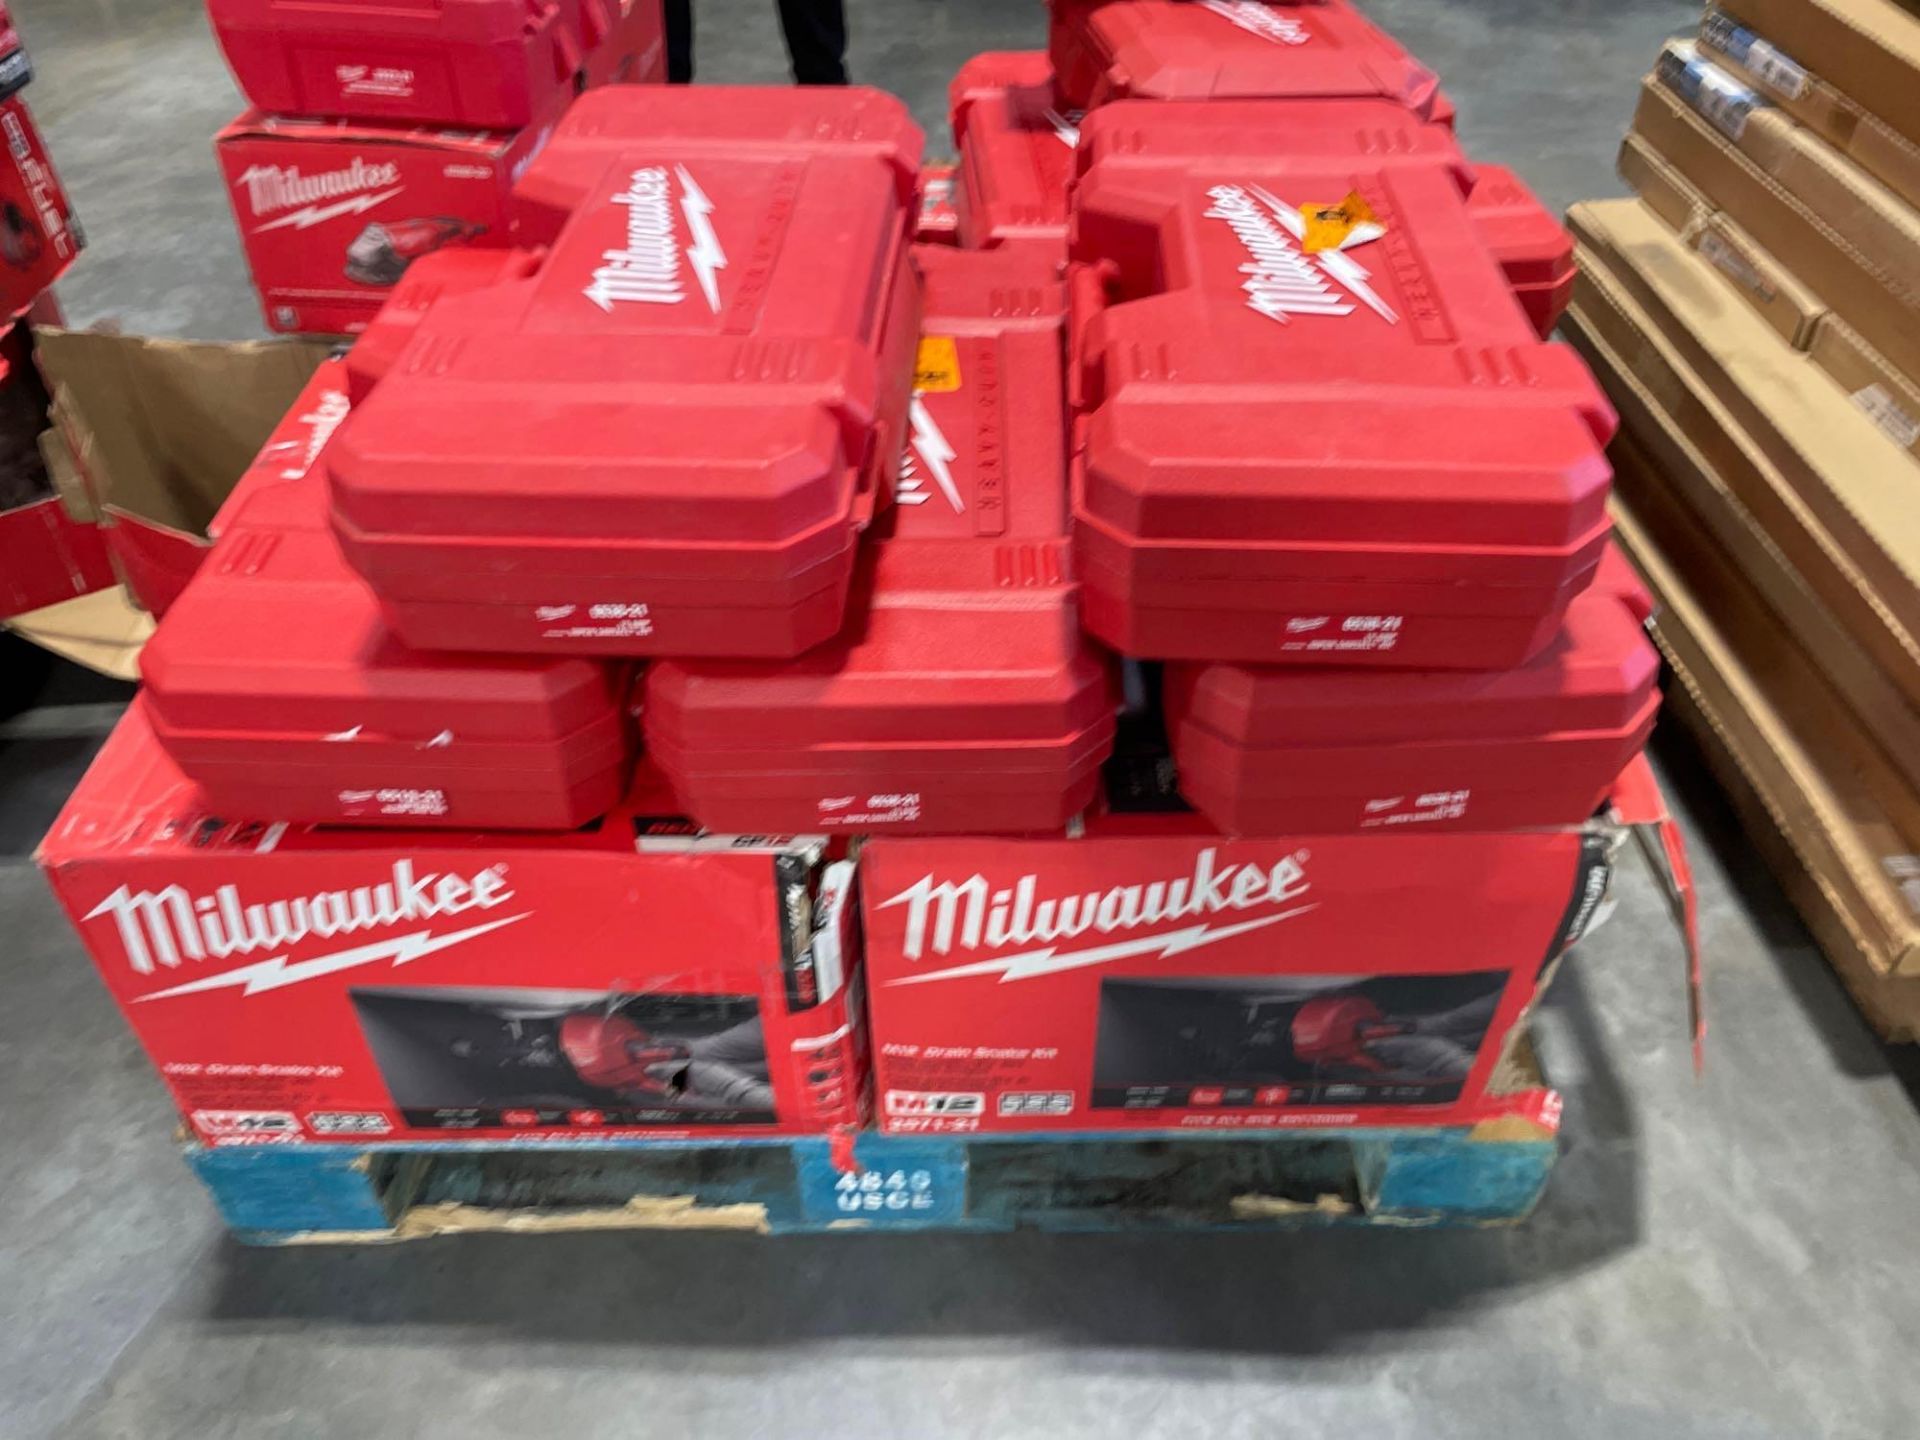 Milwaukee Tools: Some new/ used customer returns (tested and working) - Image 5 of 8